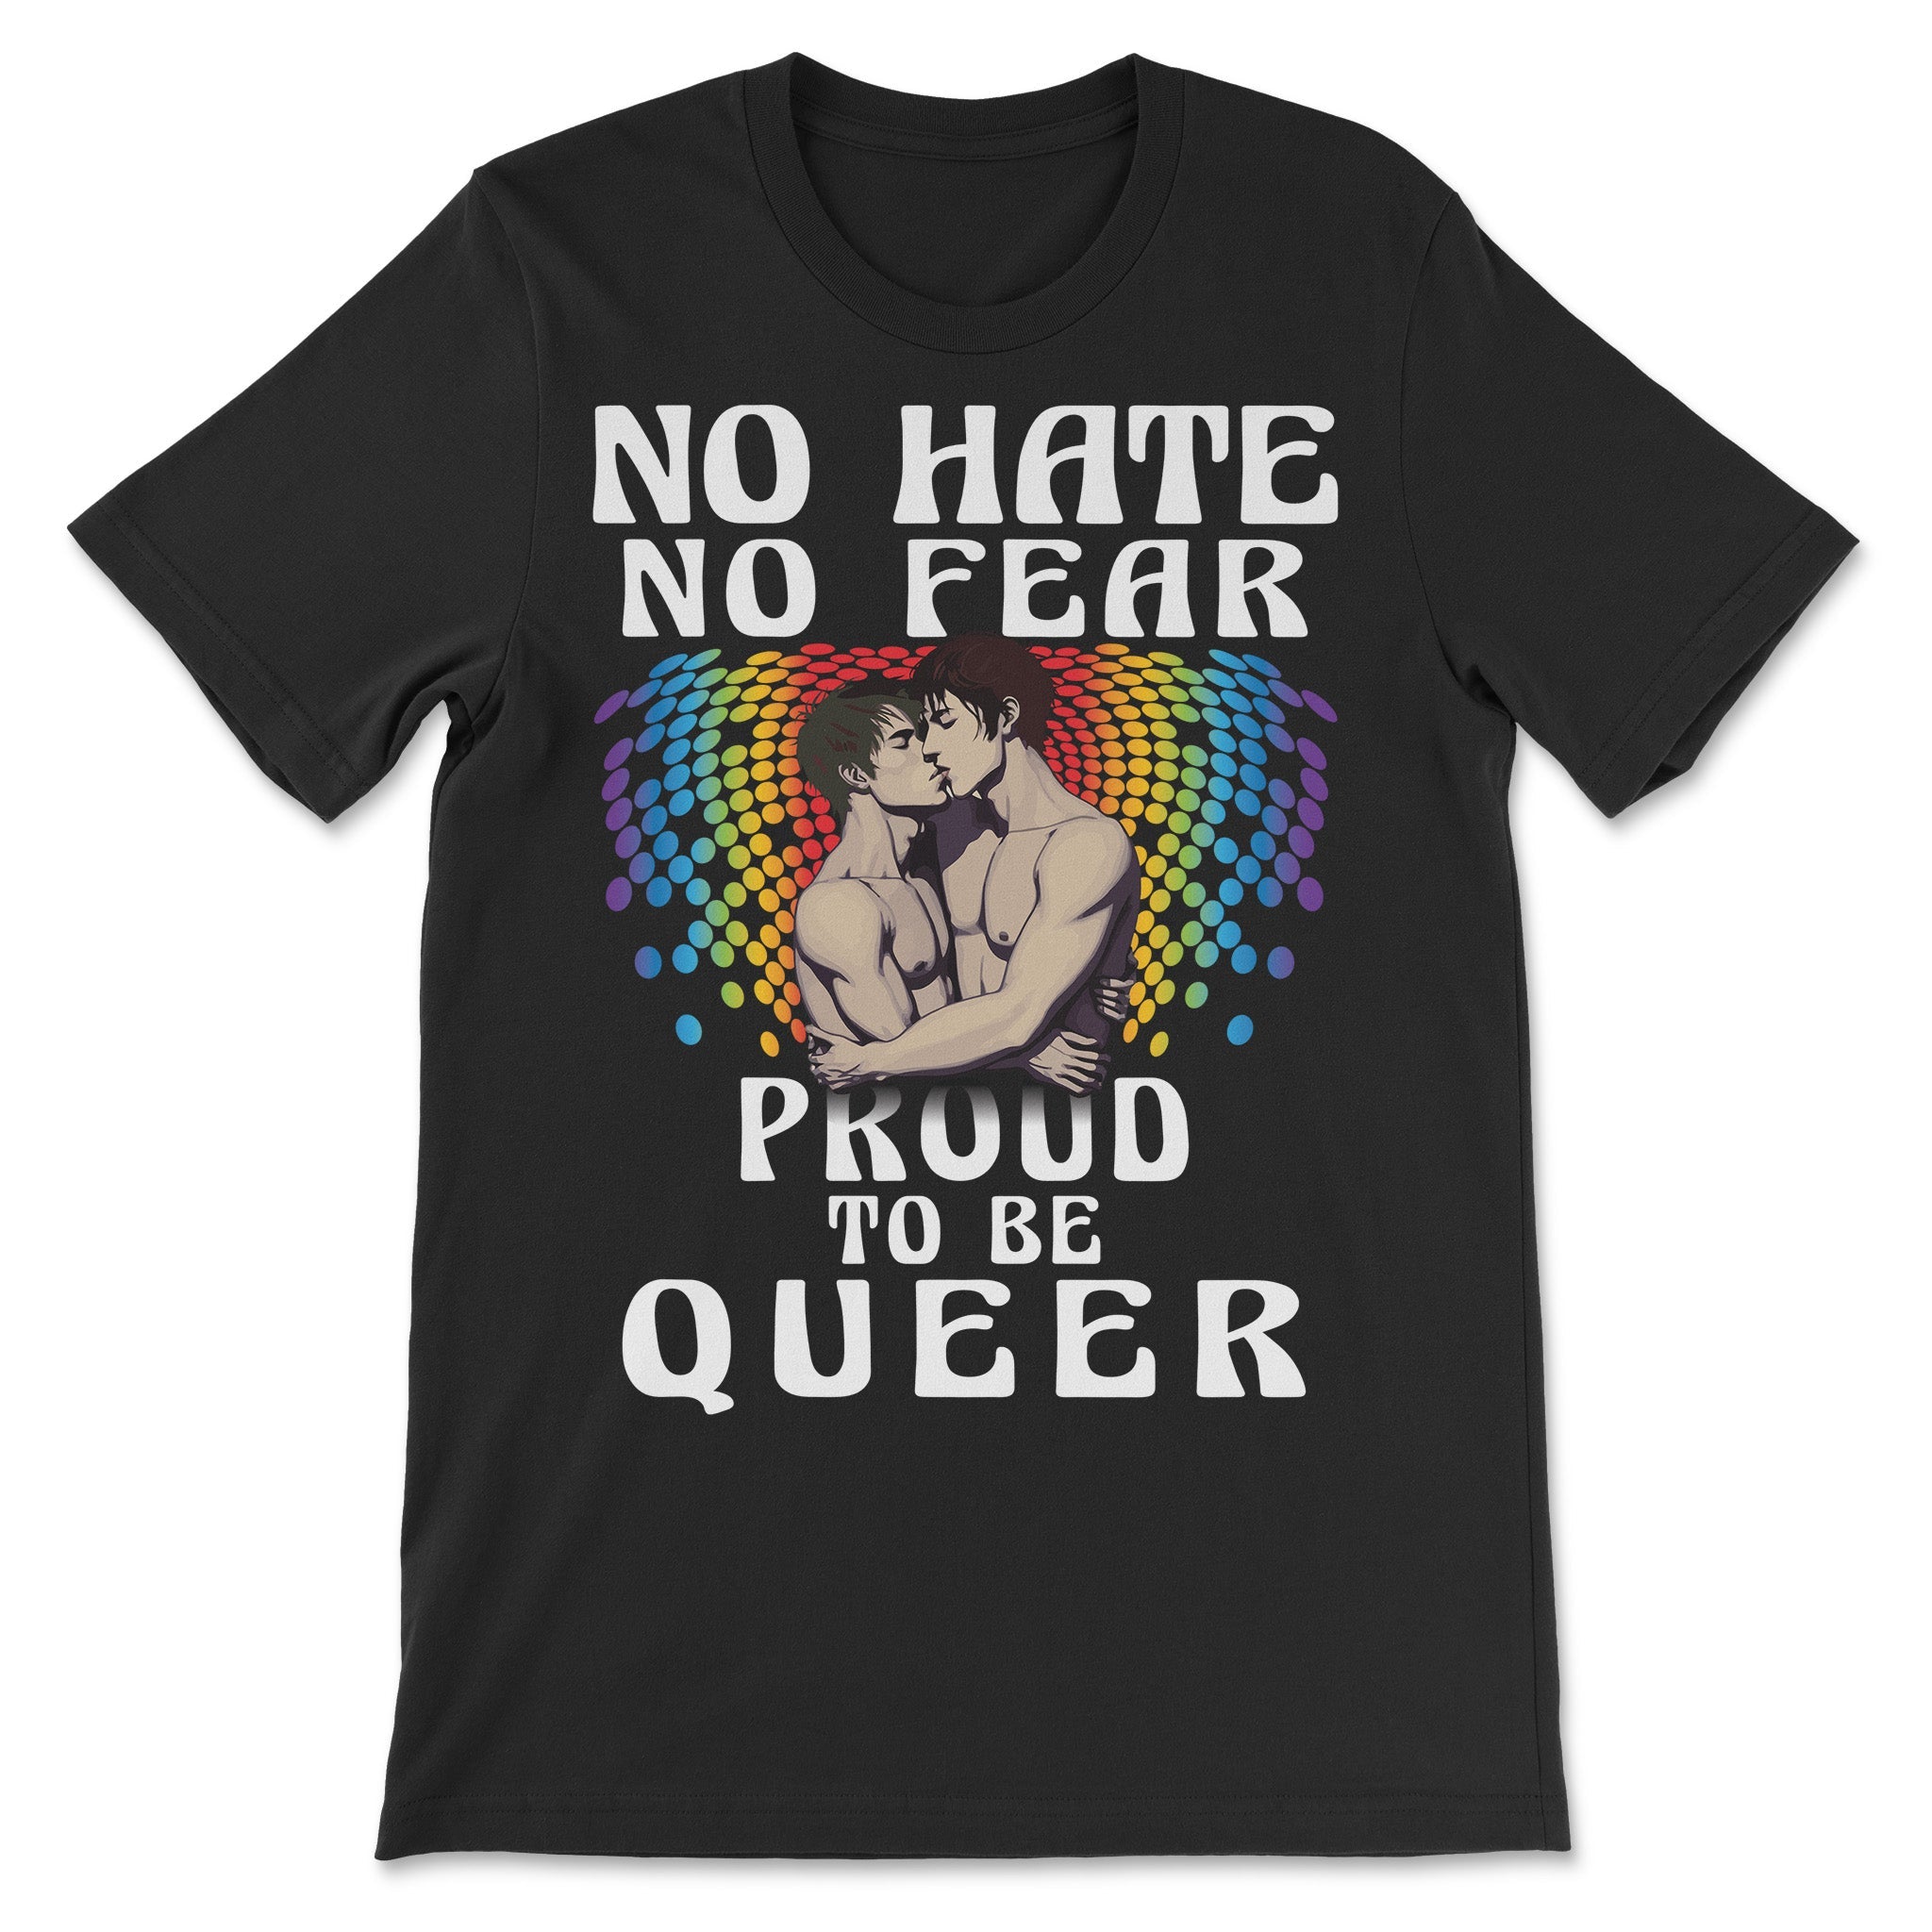 hovedvej jeg er tørstig Porto No Hate, No Fear. Proud to be Queer" T-Shirt - Bold Queer Pride Tee